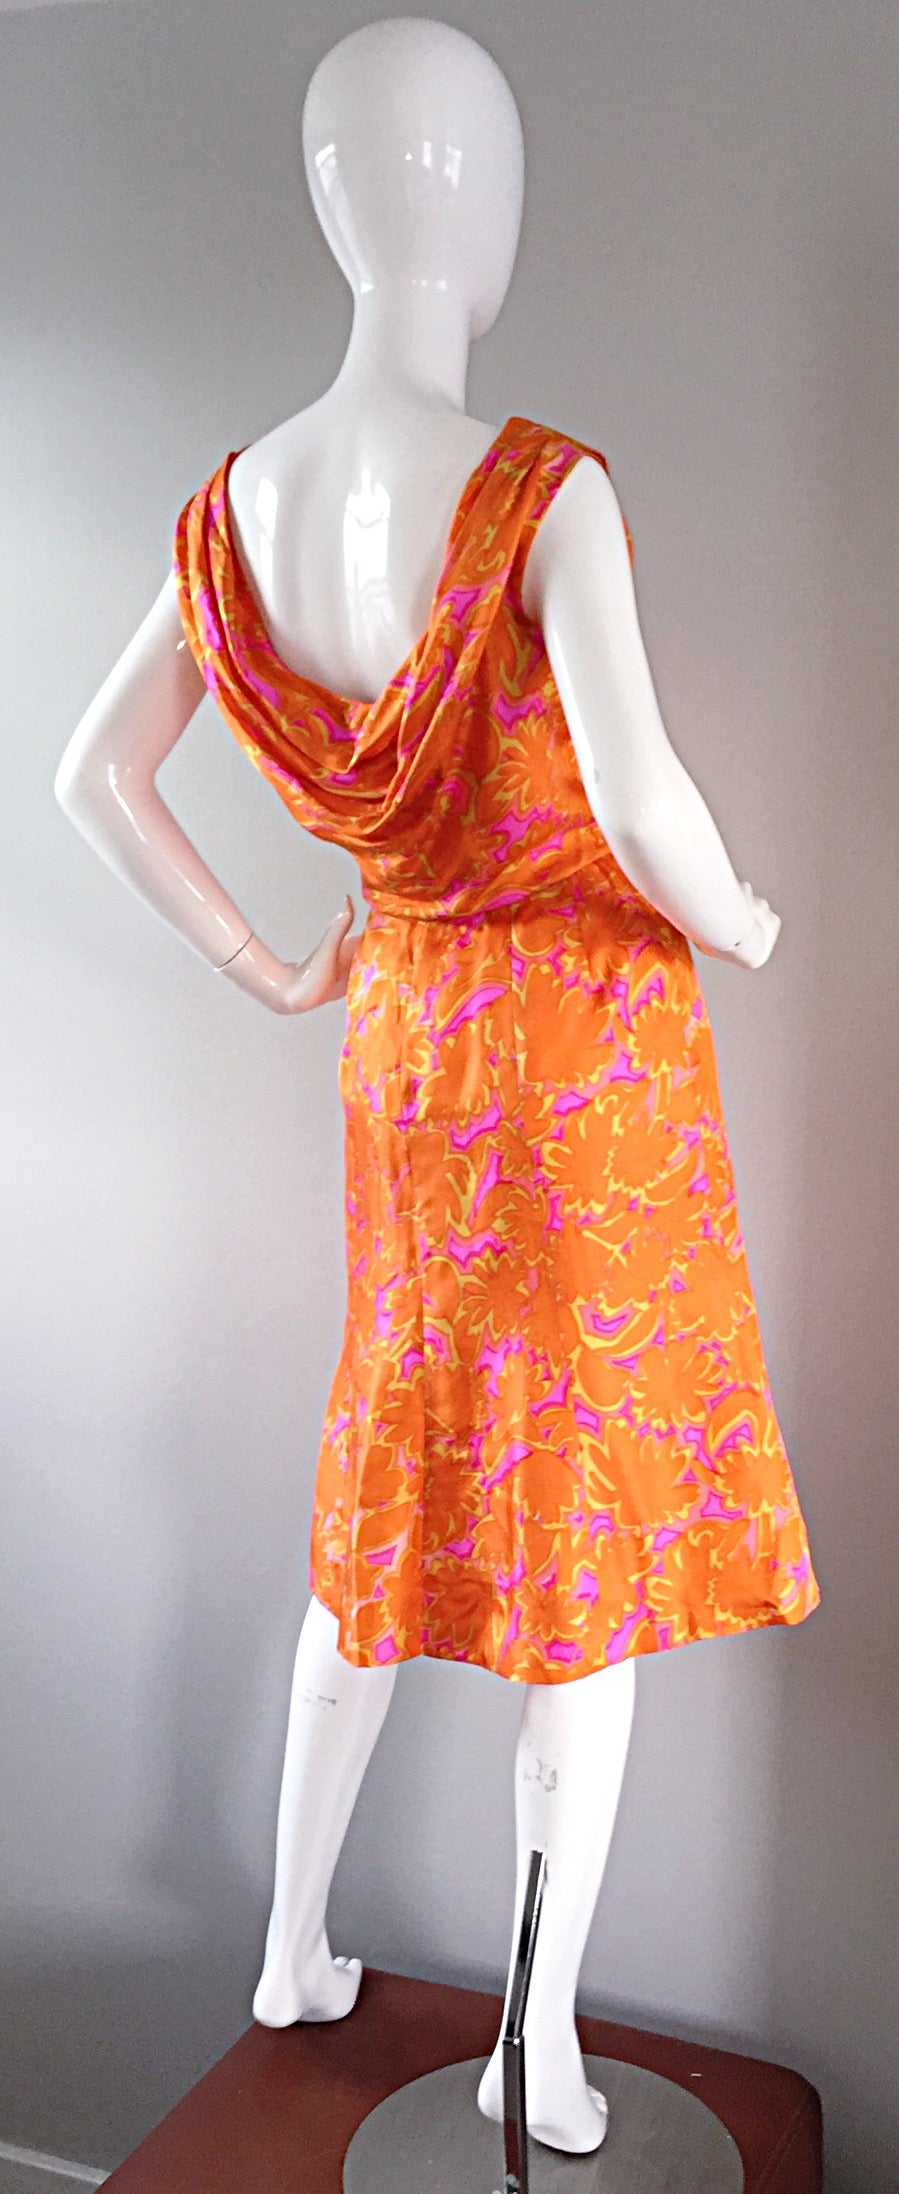 Details about   vintage 1960s dress Abstract Orange Brown Print Nardis Psychedelic 1970s Dress M